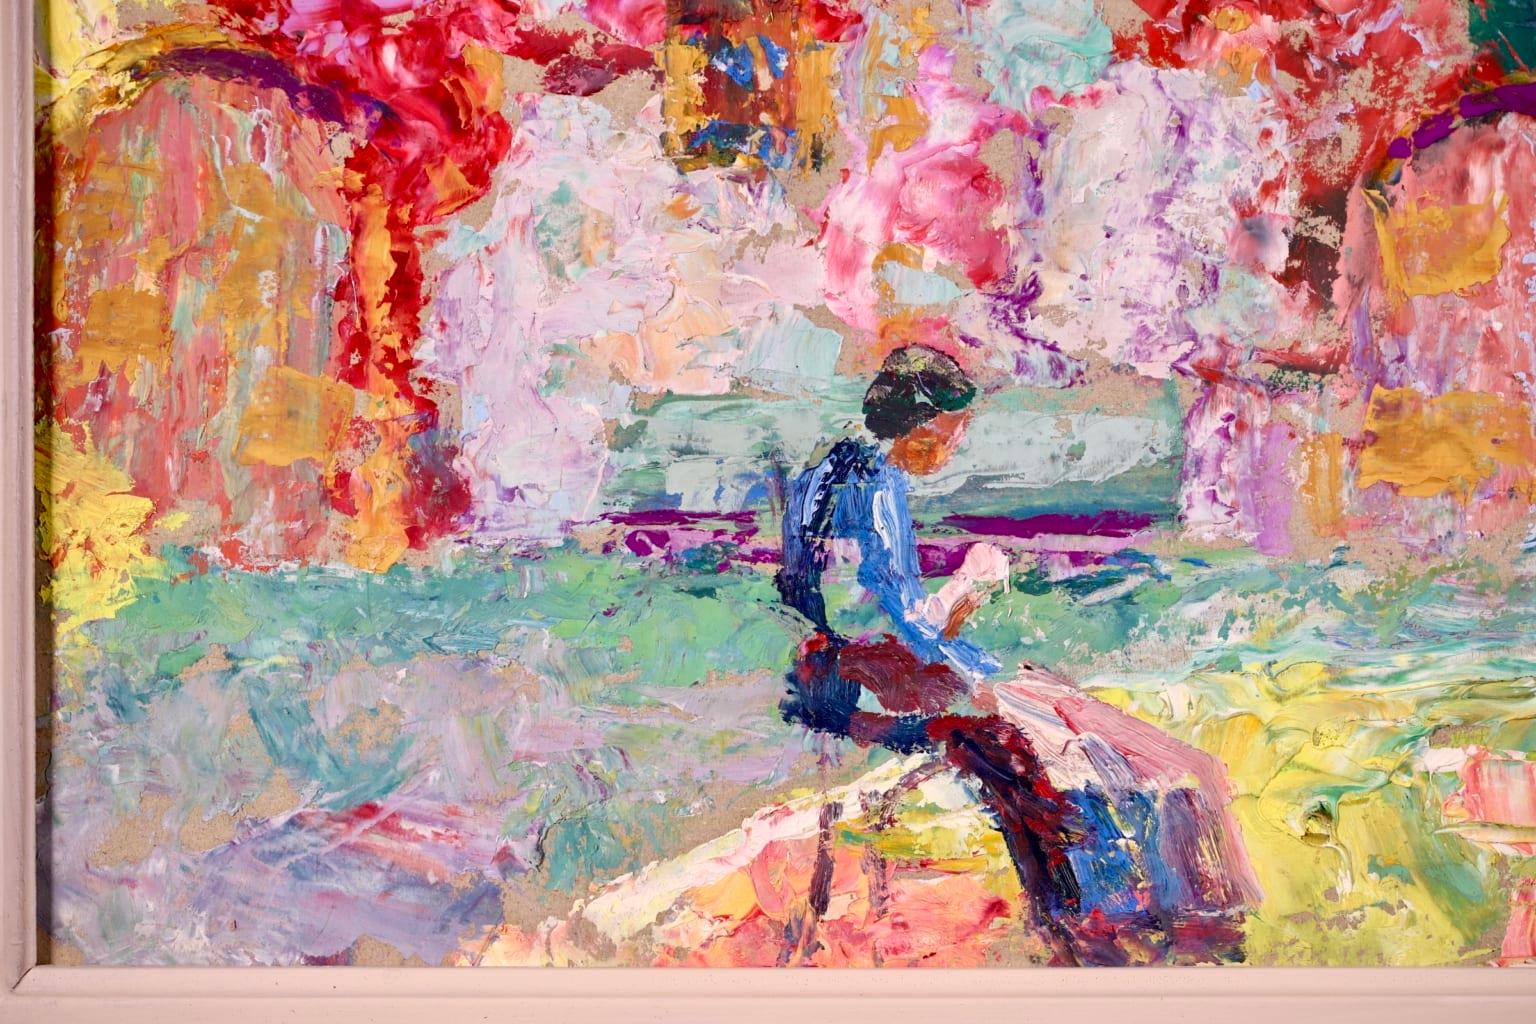 Courtyard - Post Impressionist Oil, Figure in Landscape by Victor Charreton 3